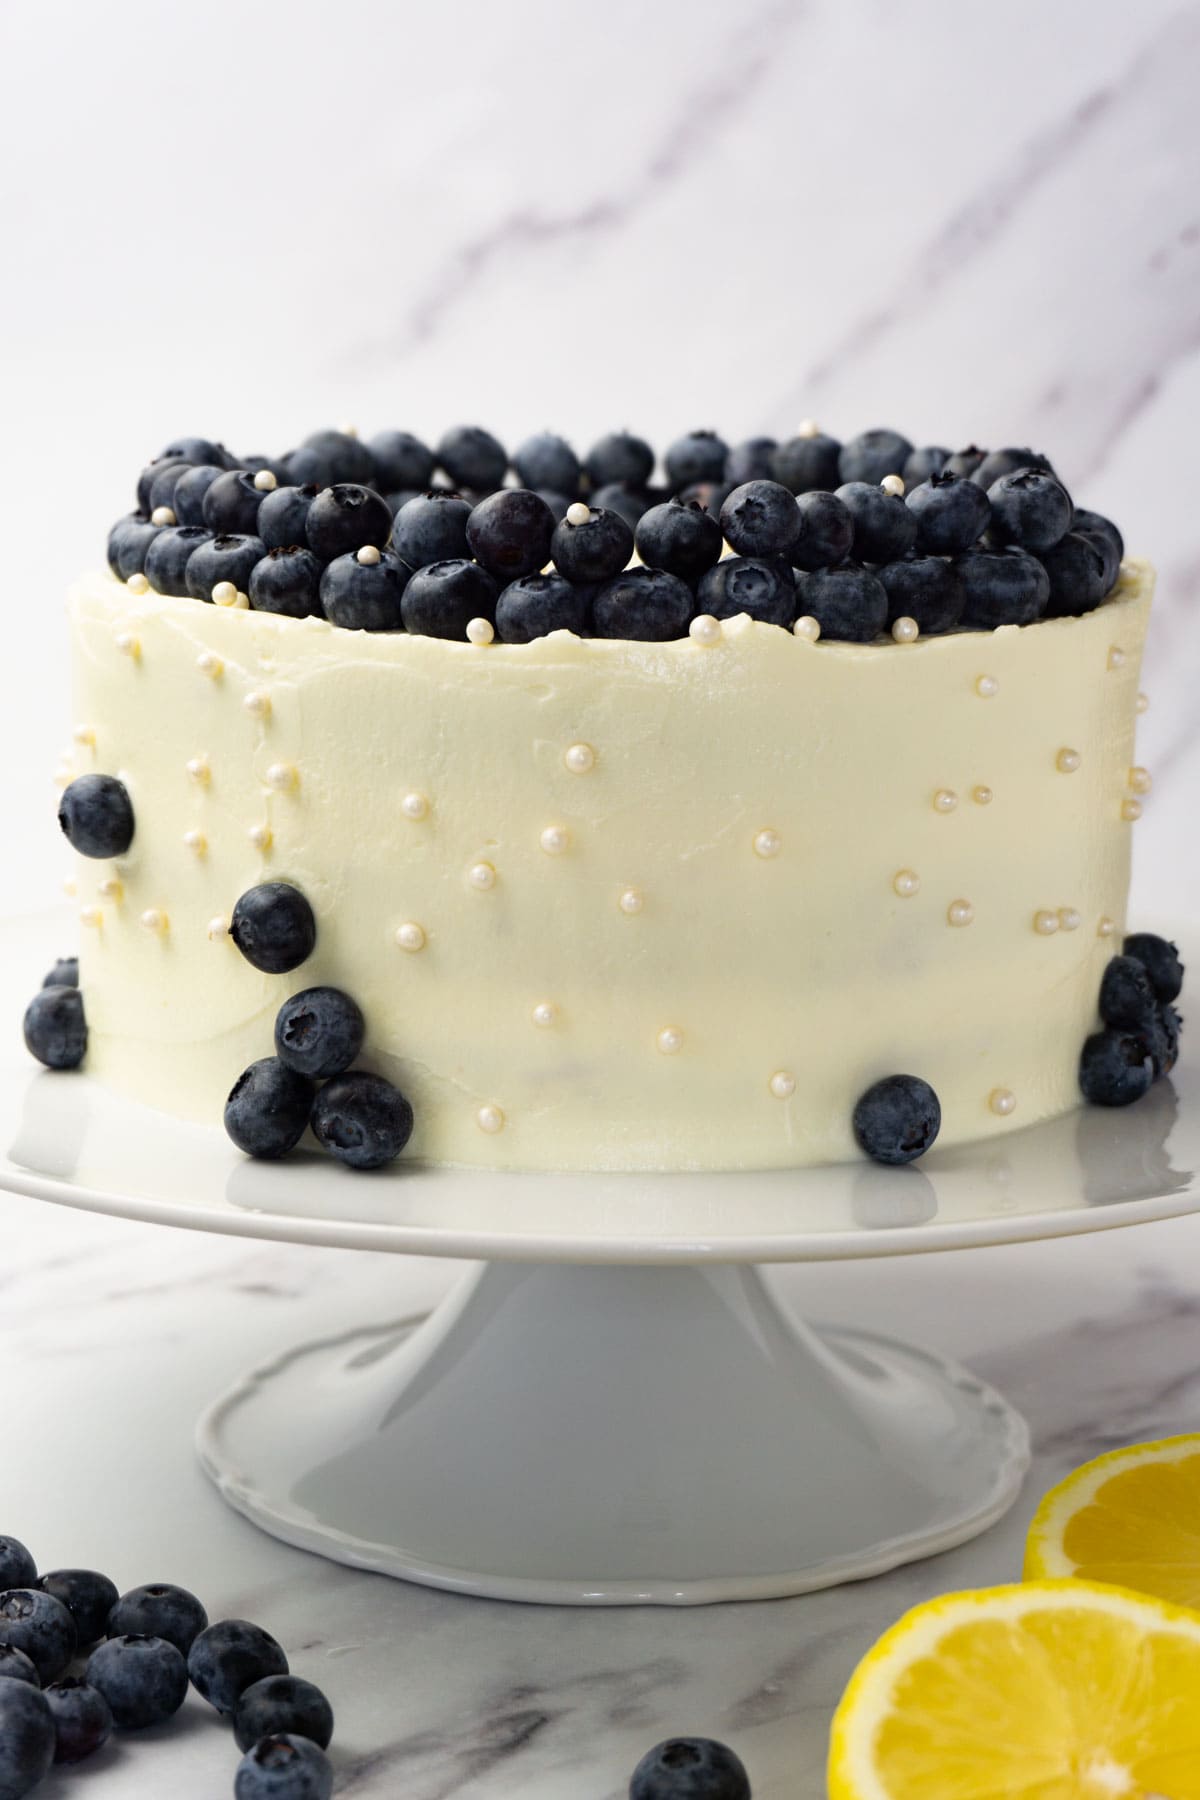 Lemon curd cake on a white cake server frosted with cream cheese frosting and decorated with sugar purls and fresh blueberries.